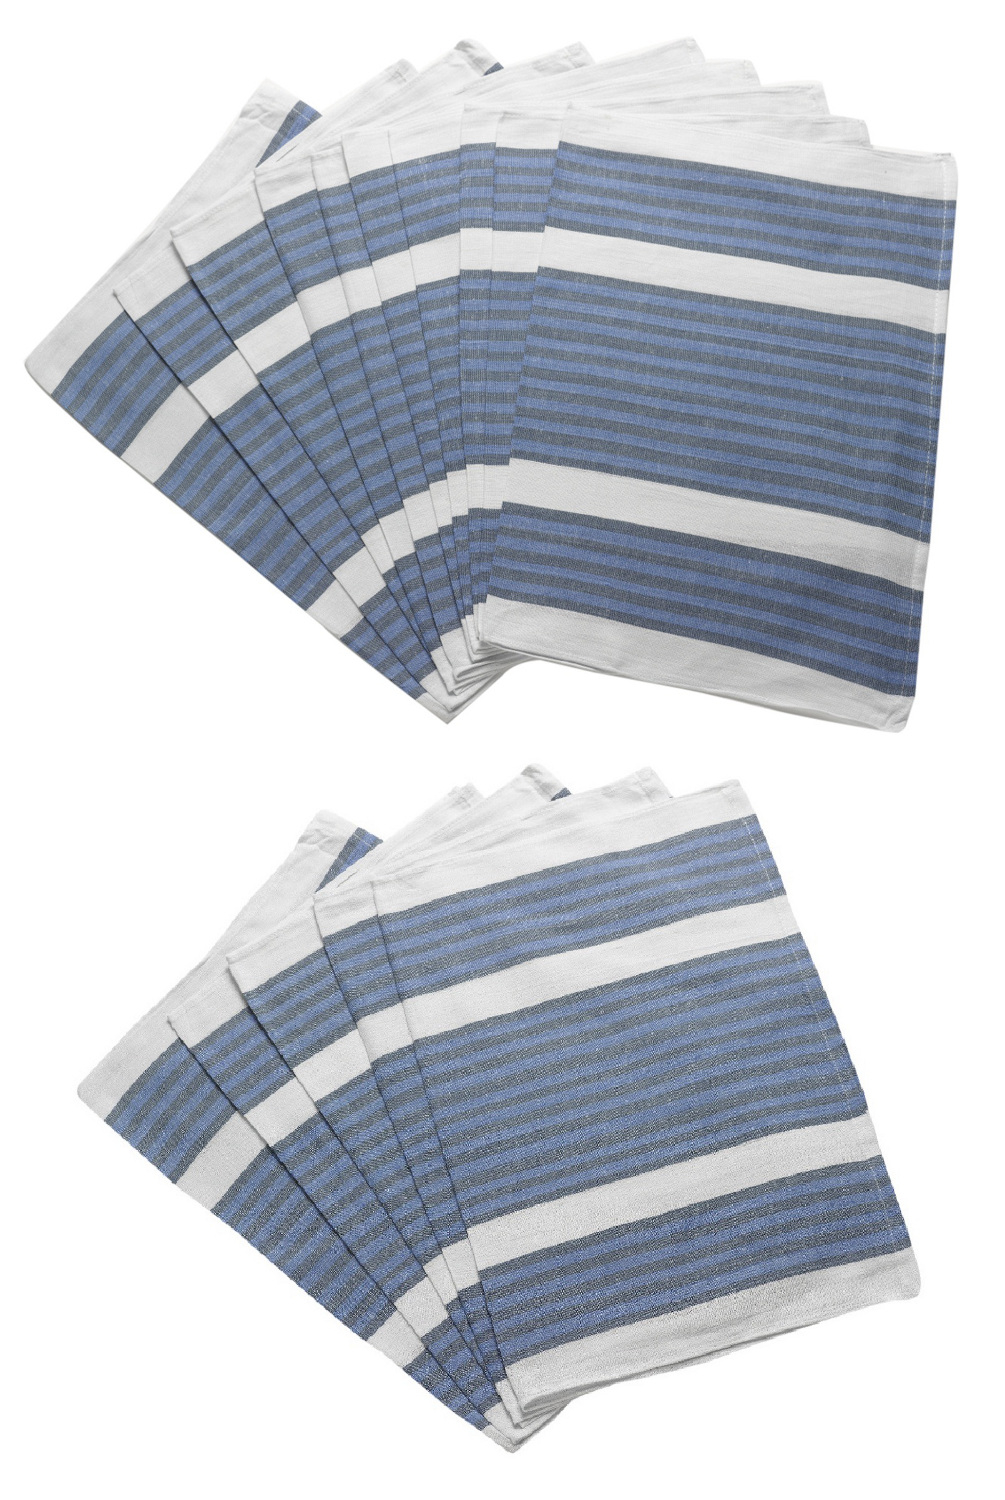 Dish Towel Knitting Pattern Details About Cotton Two Tone Striped Kitchen Tea Towels Pack Of Blue White Catering Cloths